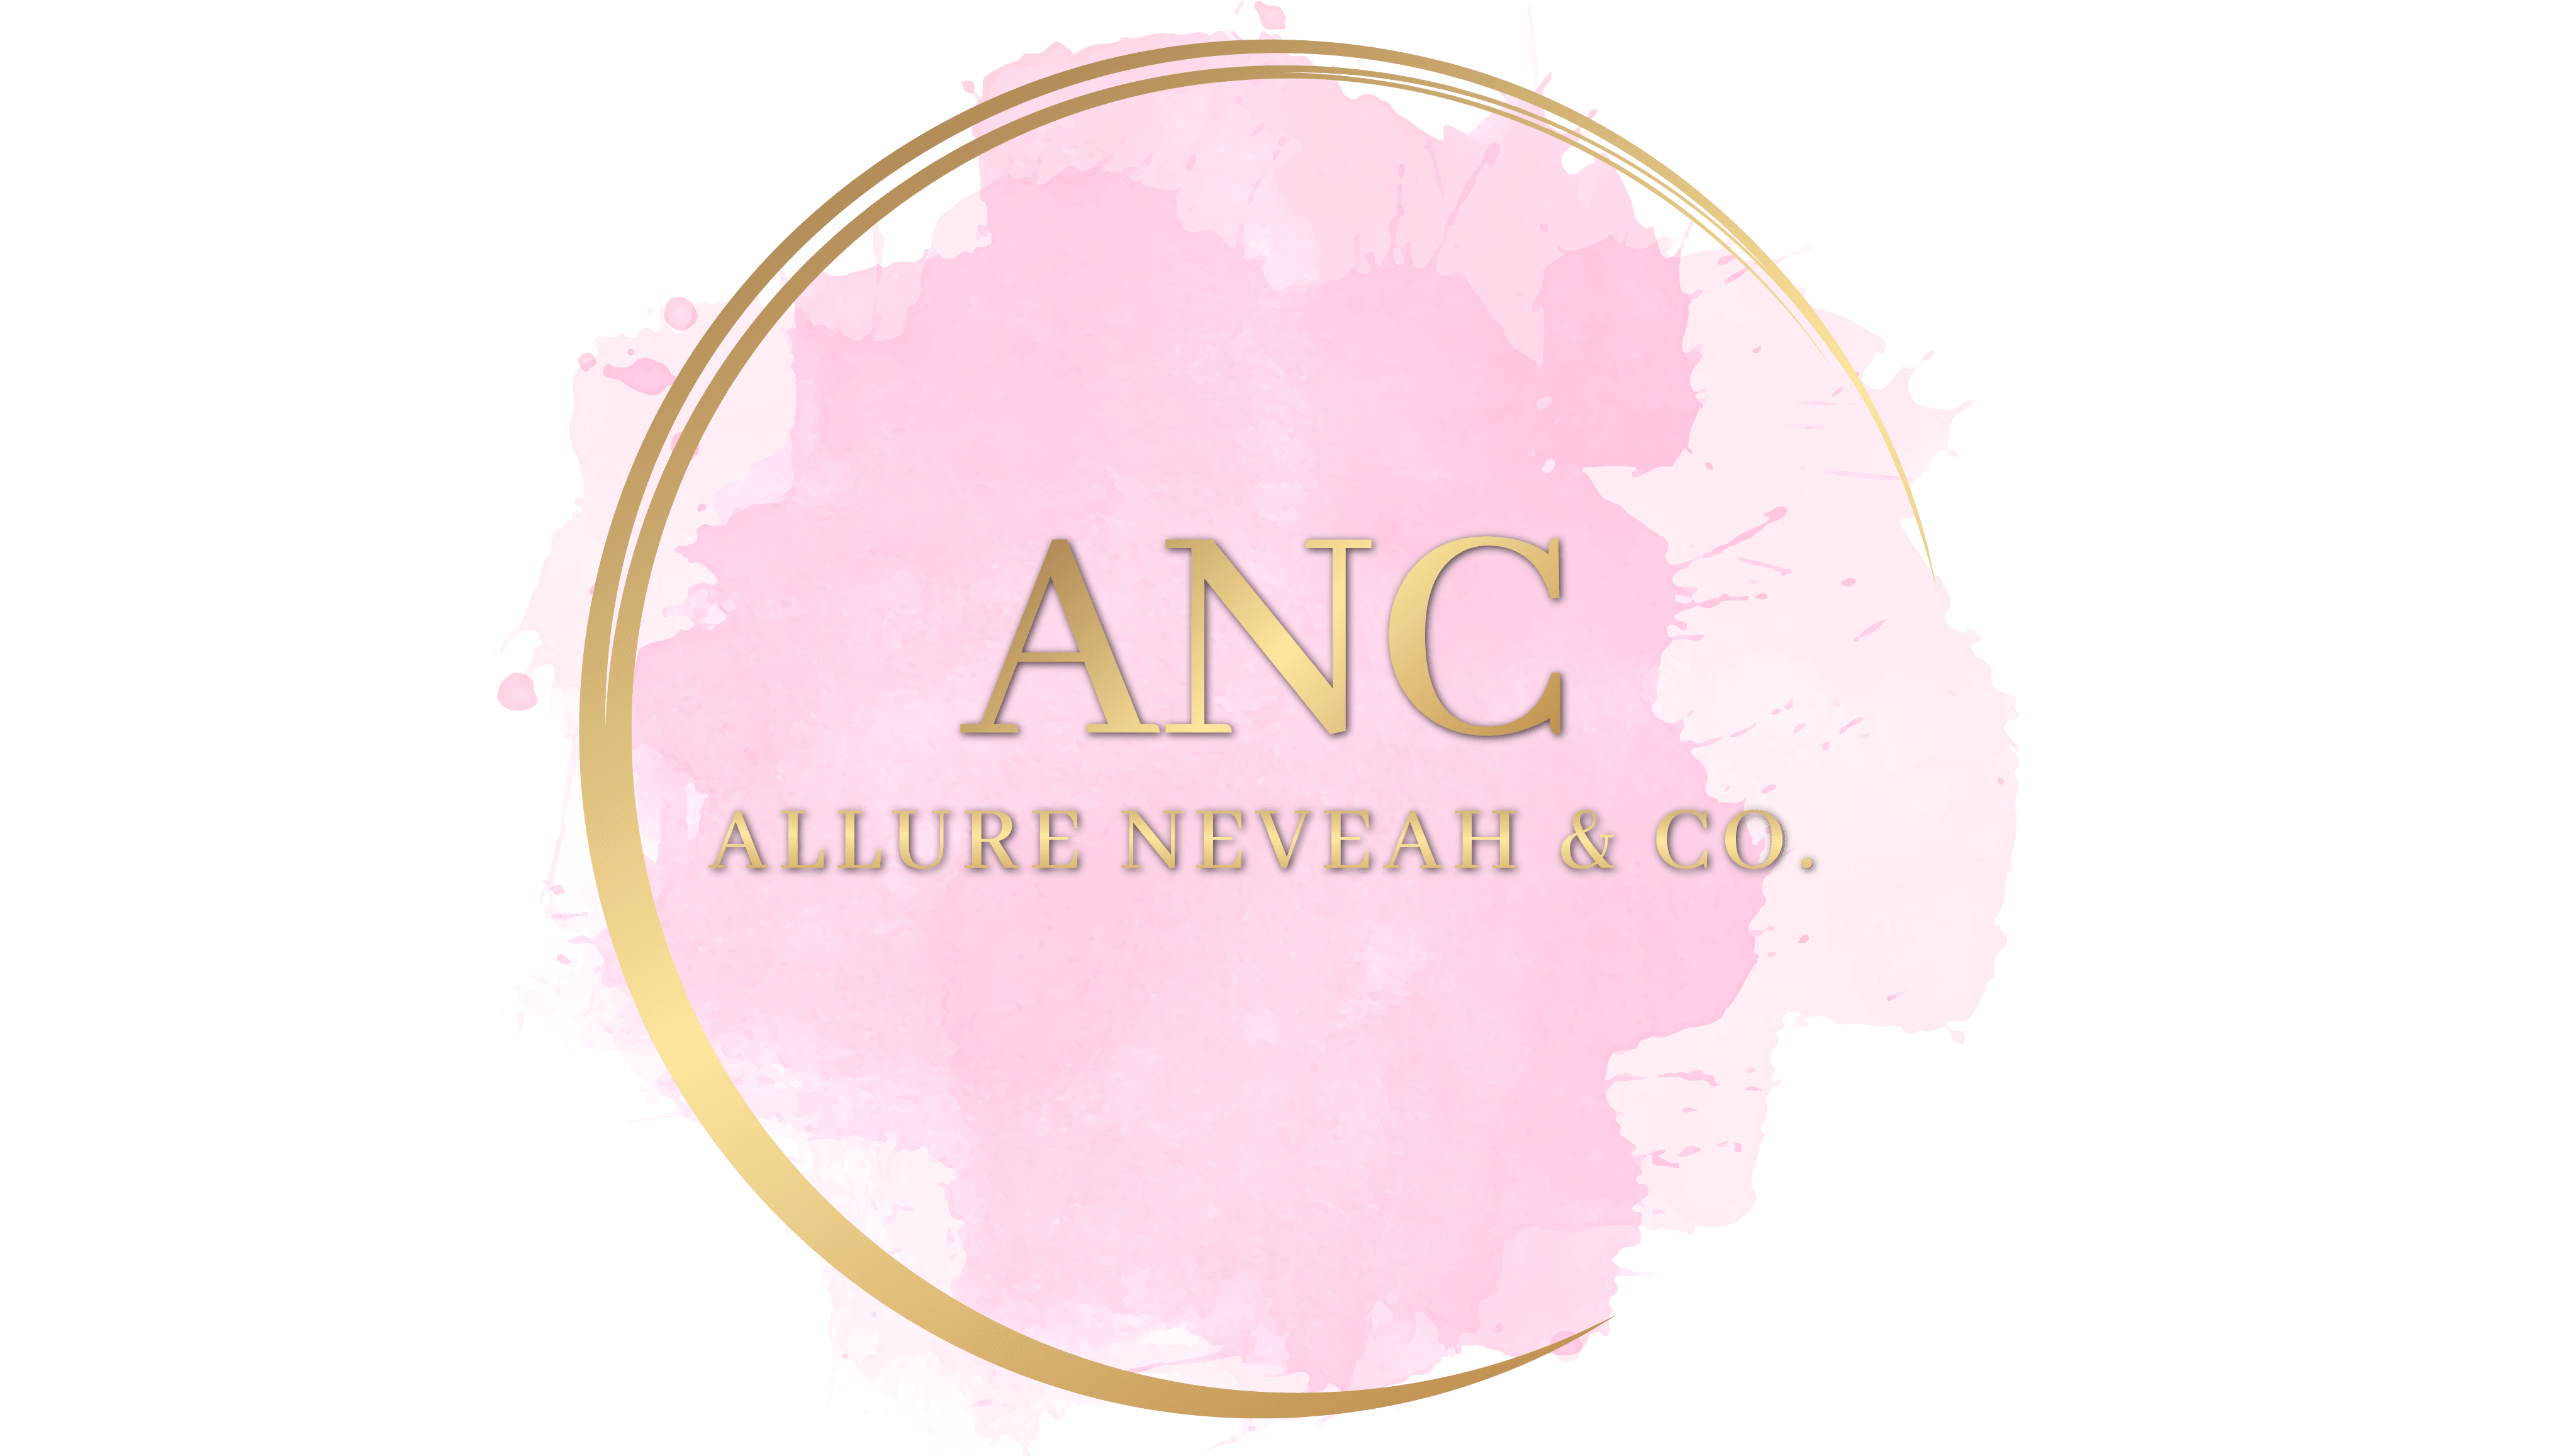 ALLURE NEVEAH & CO